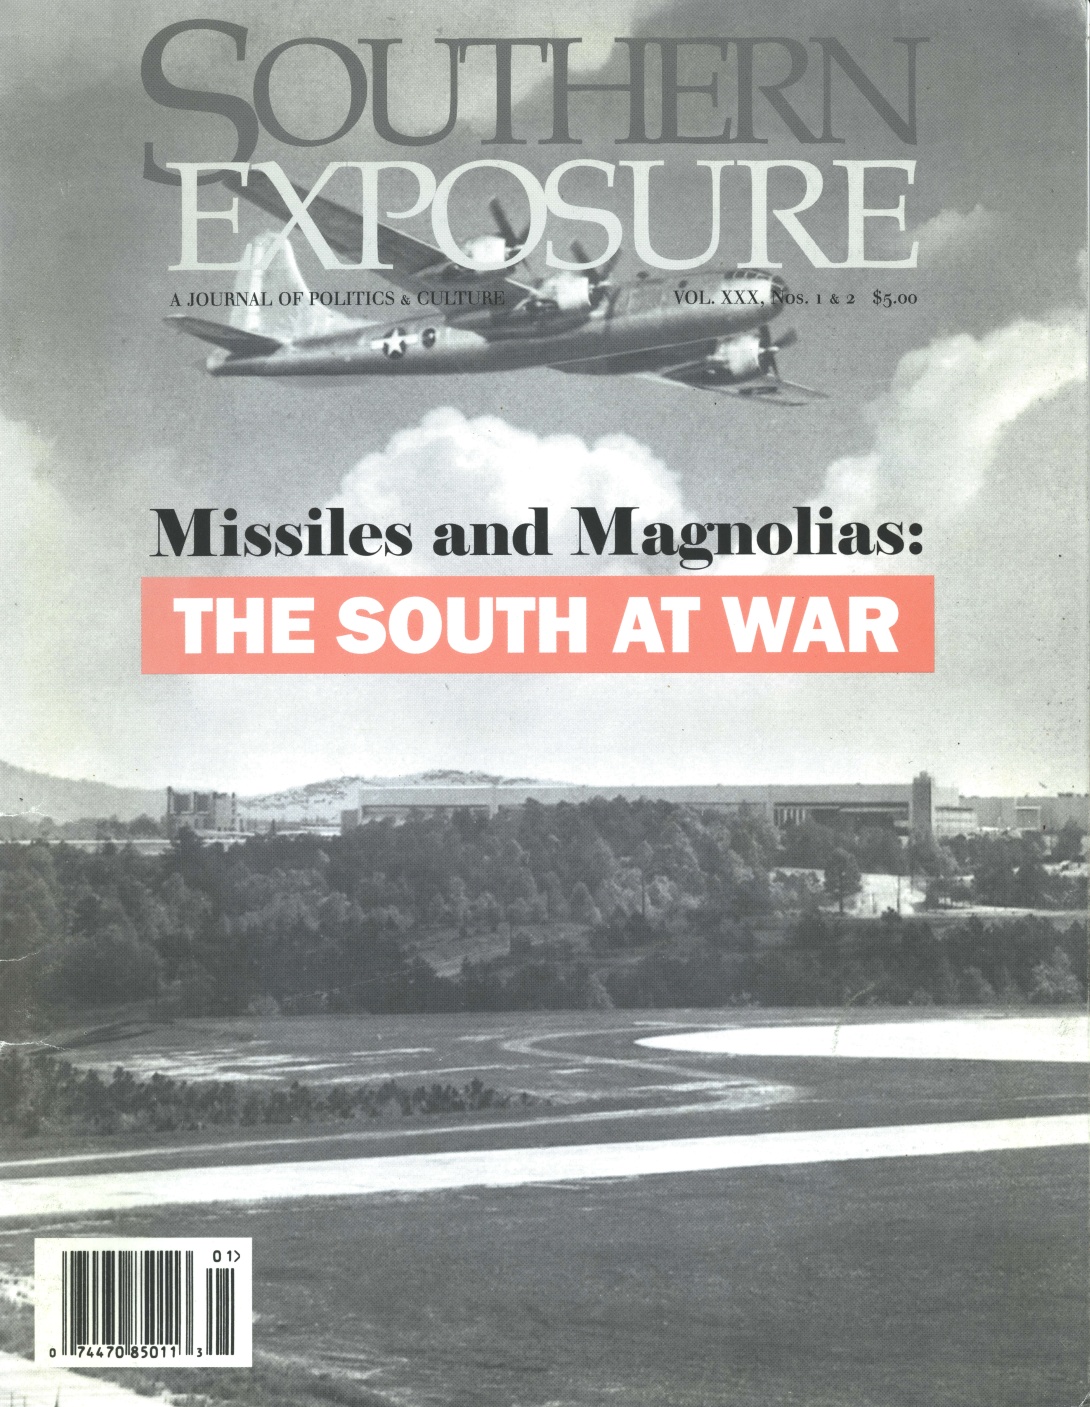 Magazine cover with black and white photo of landscape with large buildings in the background and warplane flying overhead, text reads "Missiles and Magnolias: the South at War" 